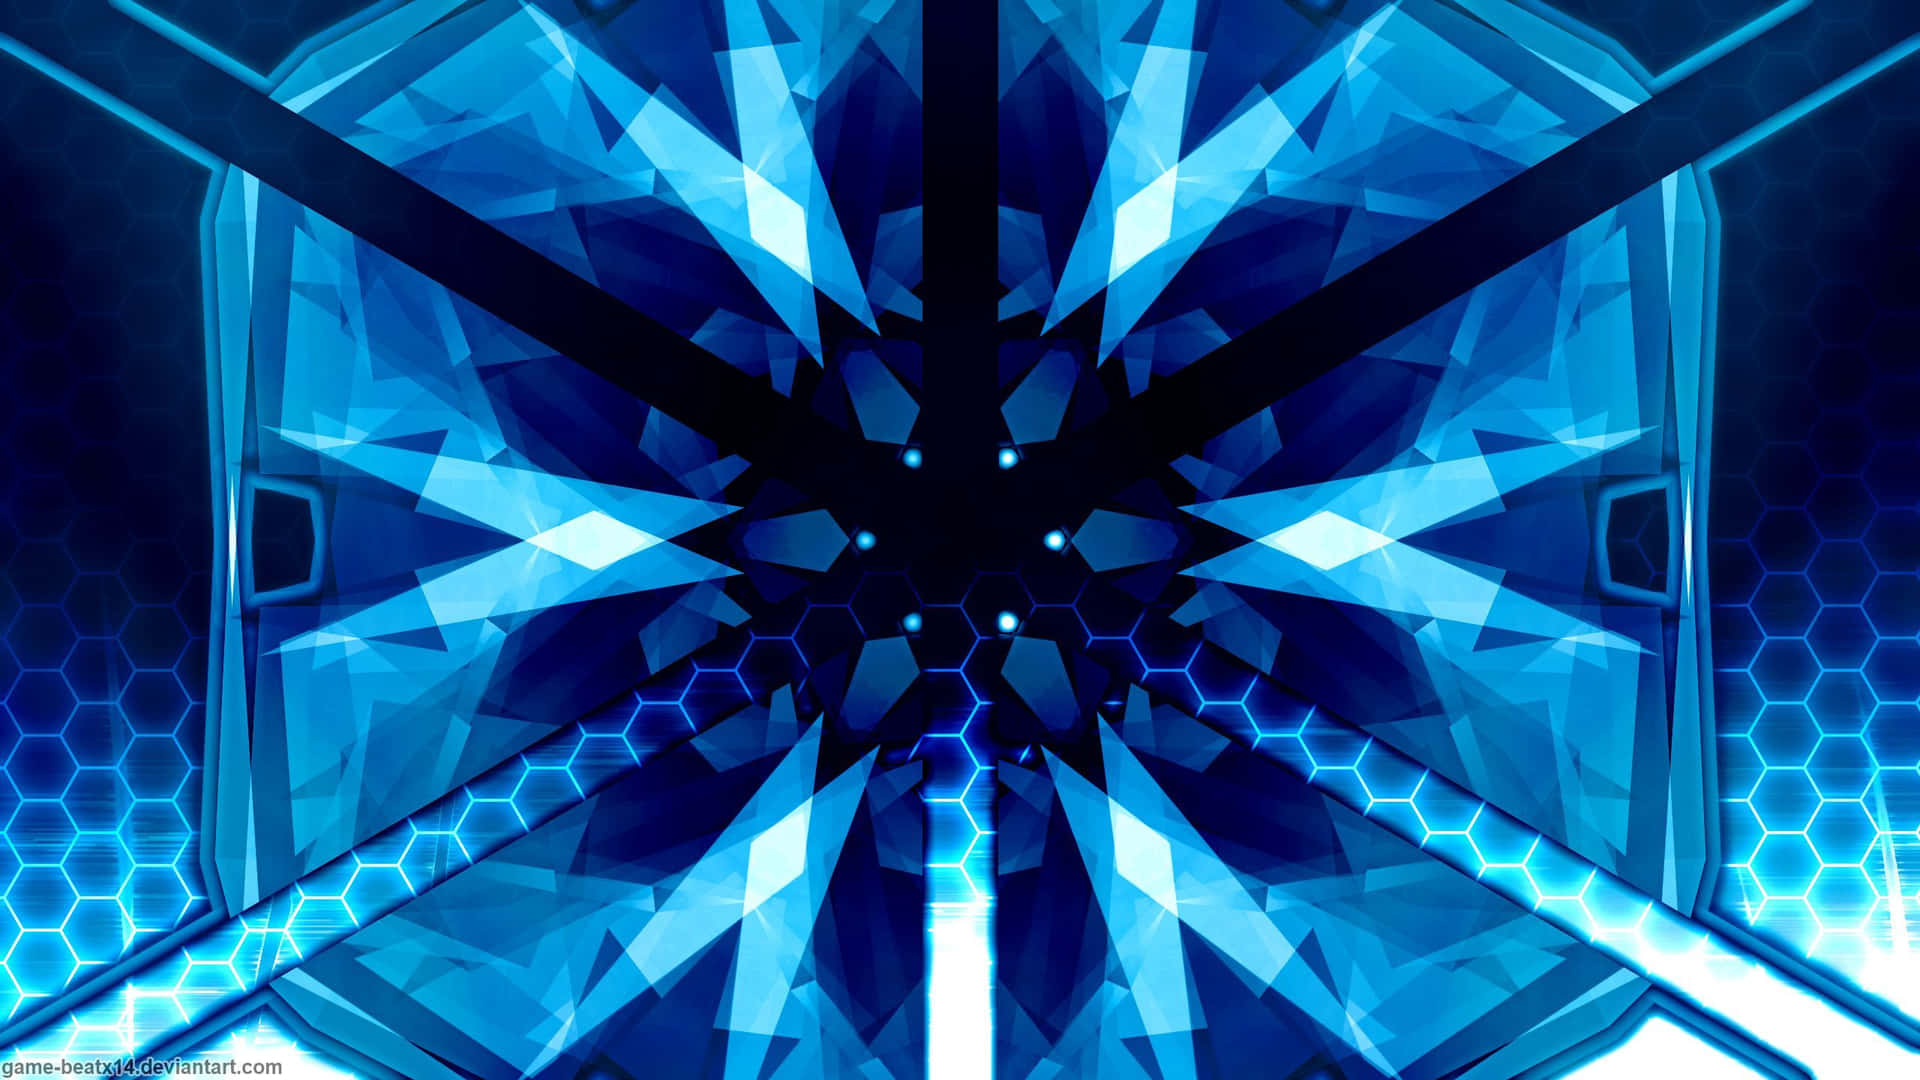 A Blue Abstract Design With Blue Lights Wallpaper